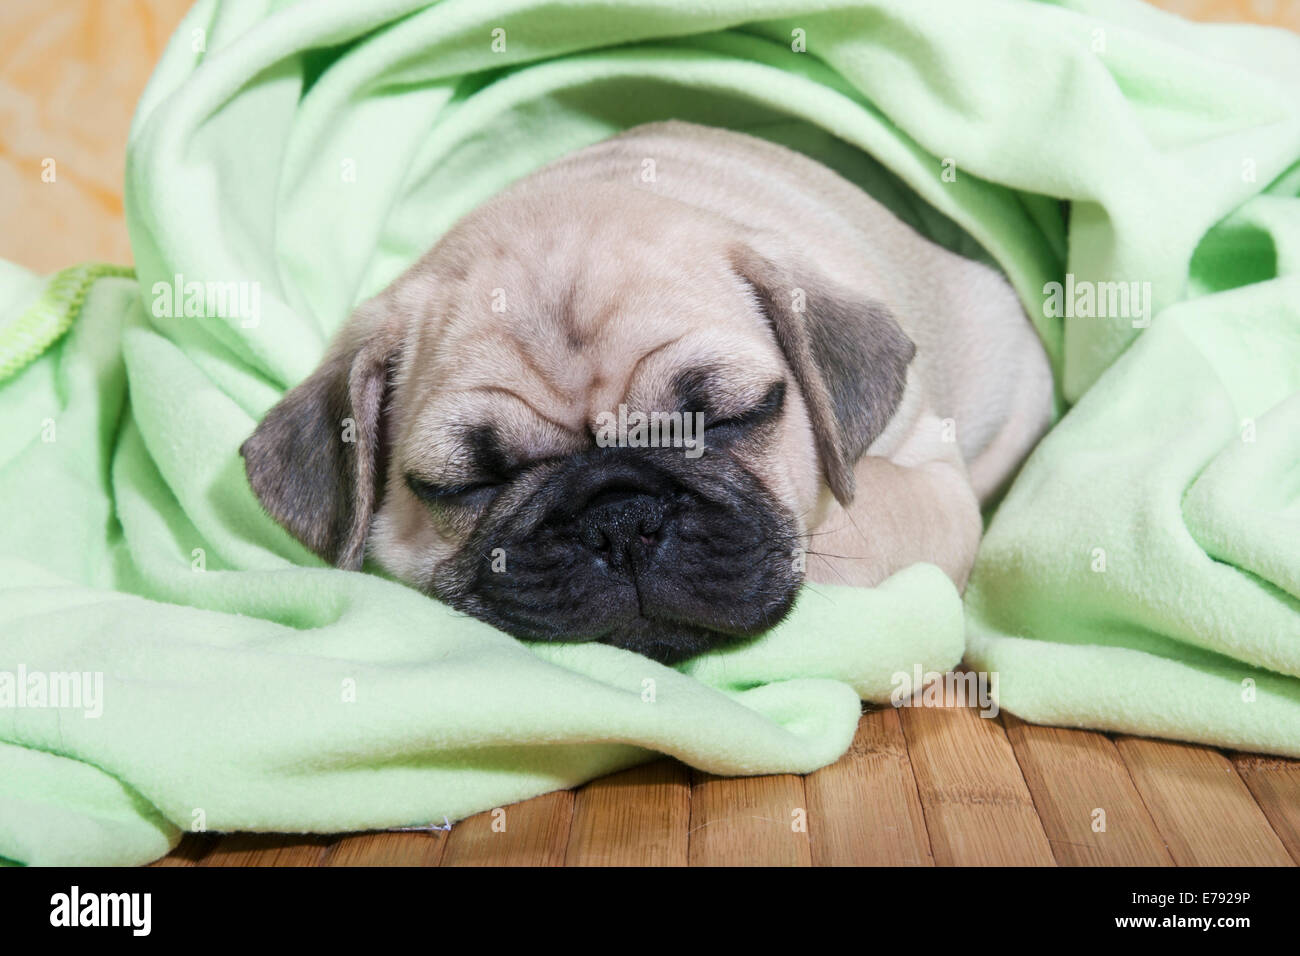 Pug, puppy, sleeping with a blanket Stock Photo